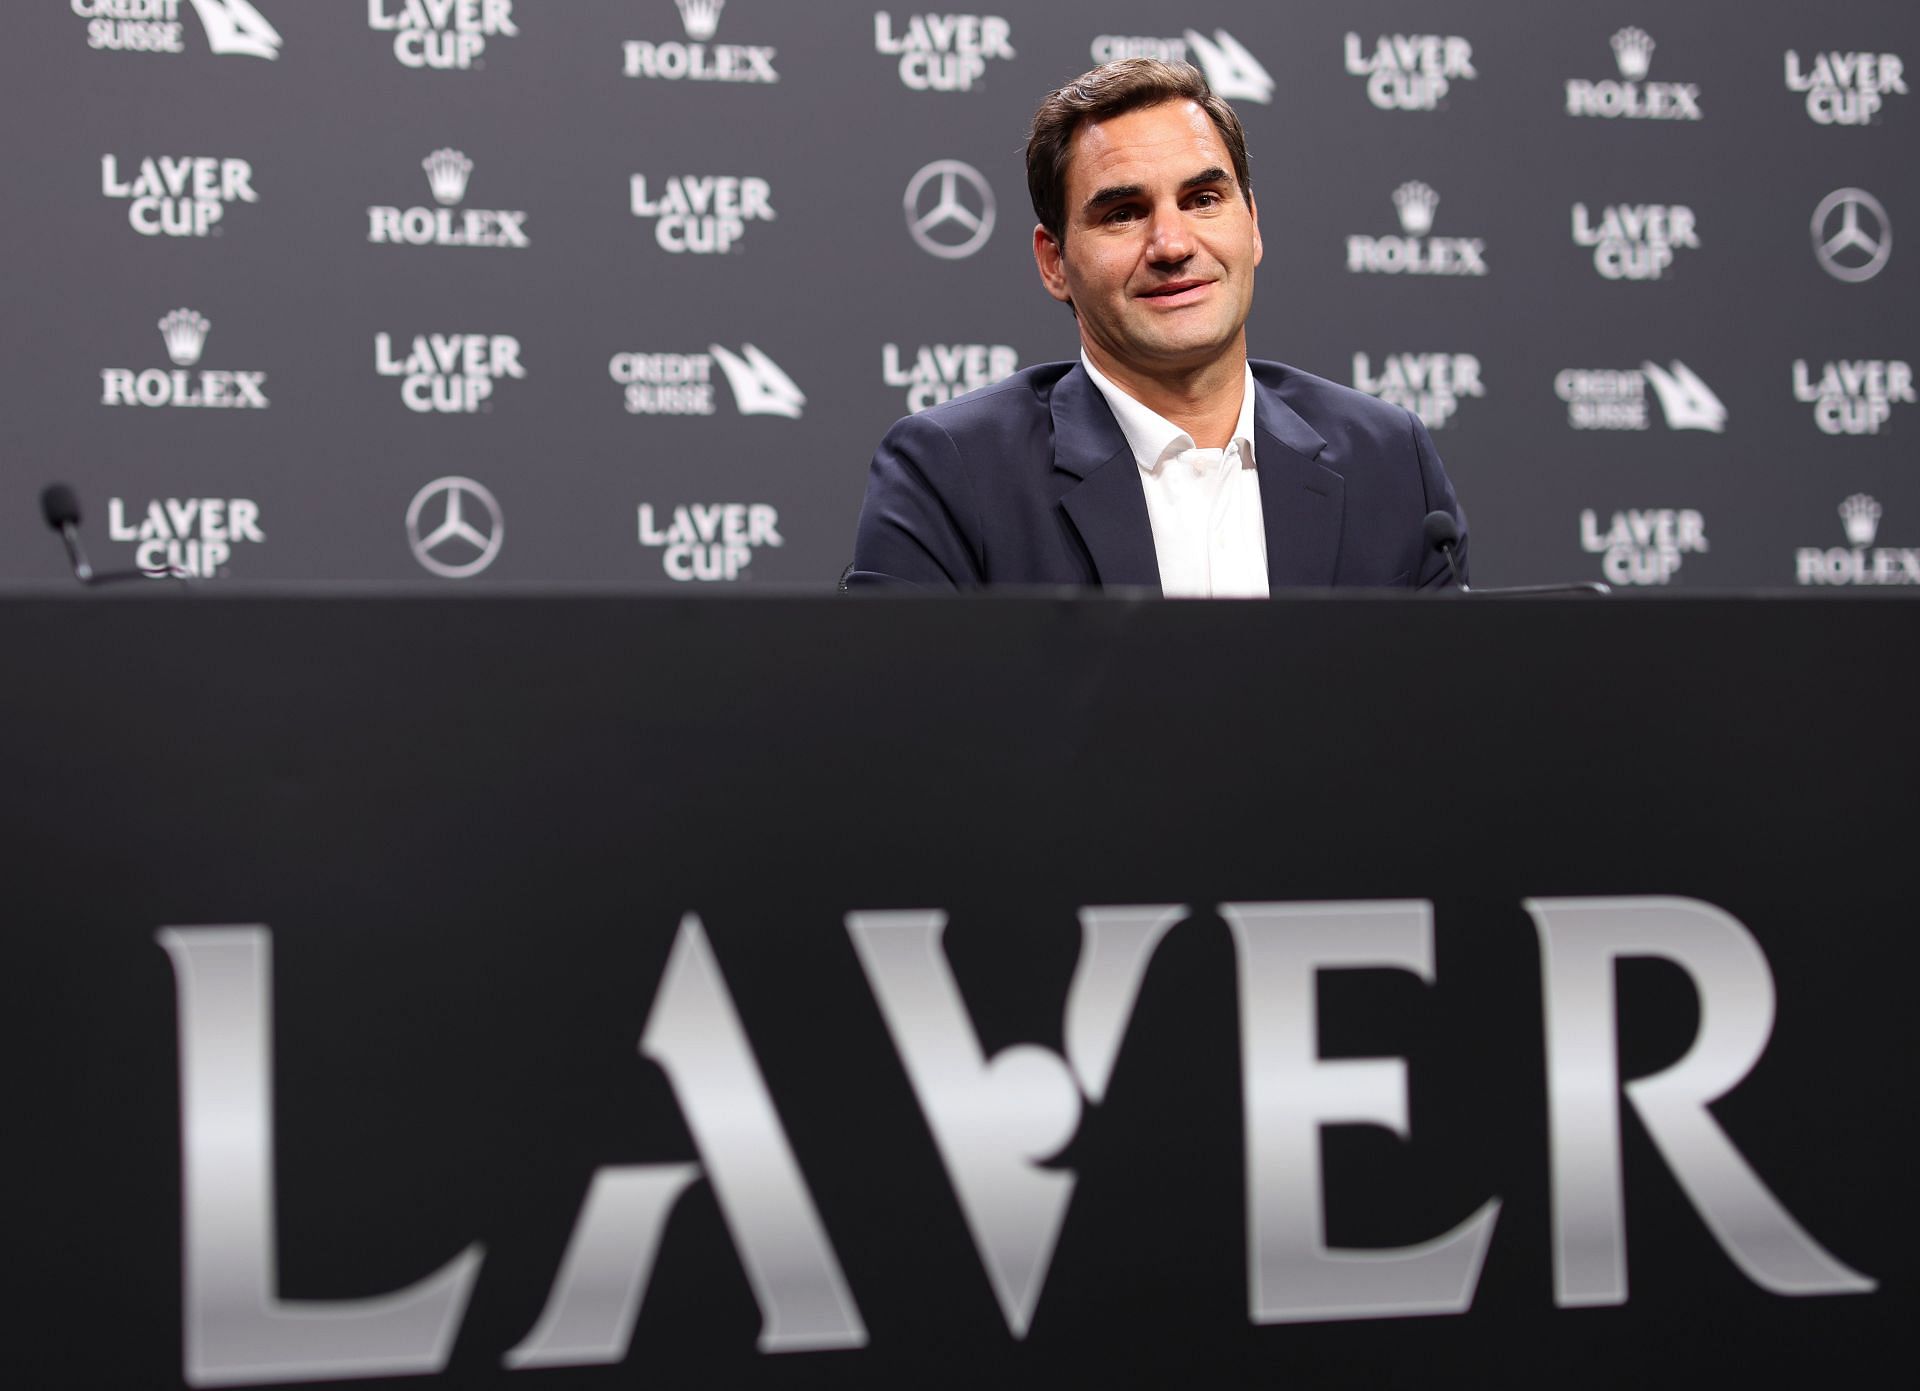 Roger Federer at the 2022 Laver Cup press conference